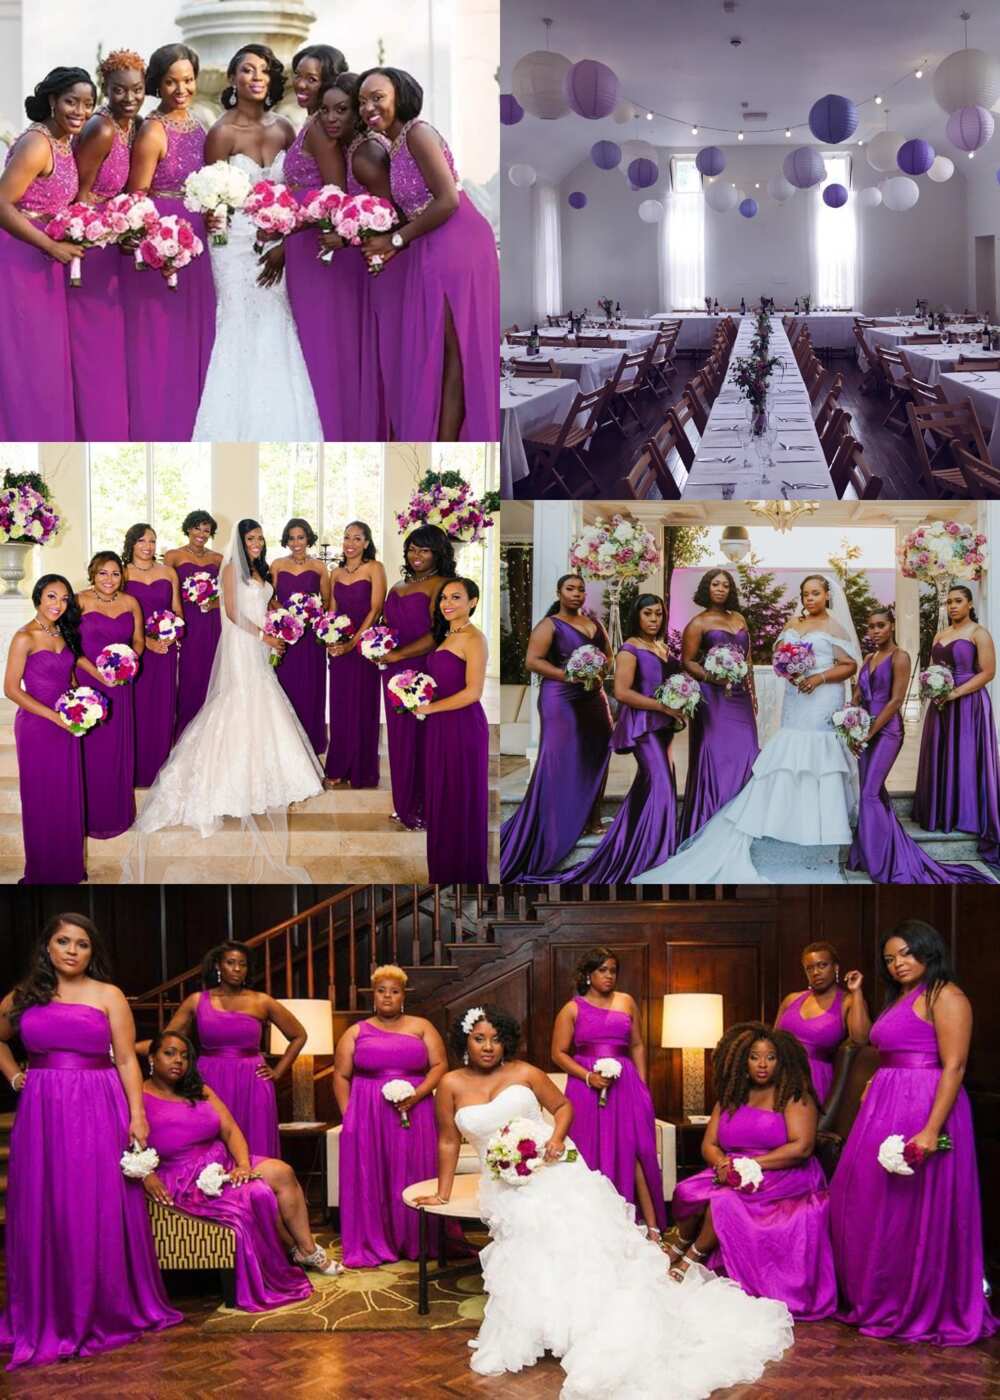 Colours that go with purple for a wedding